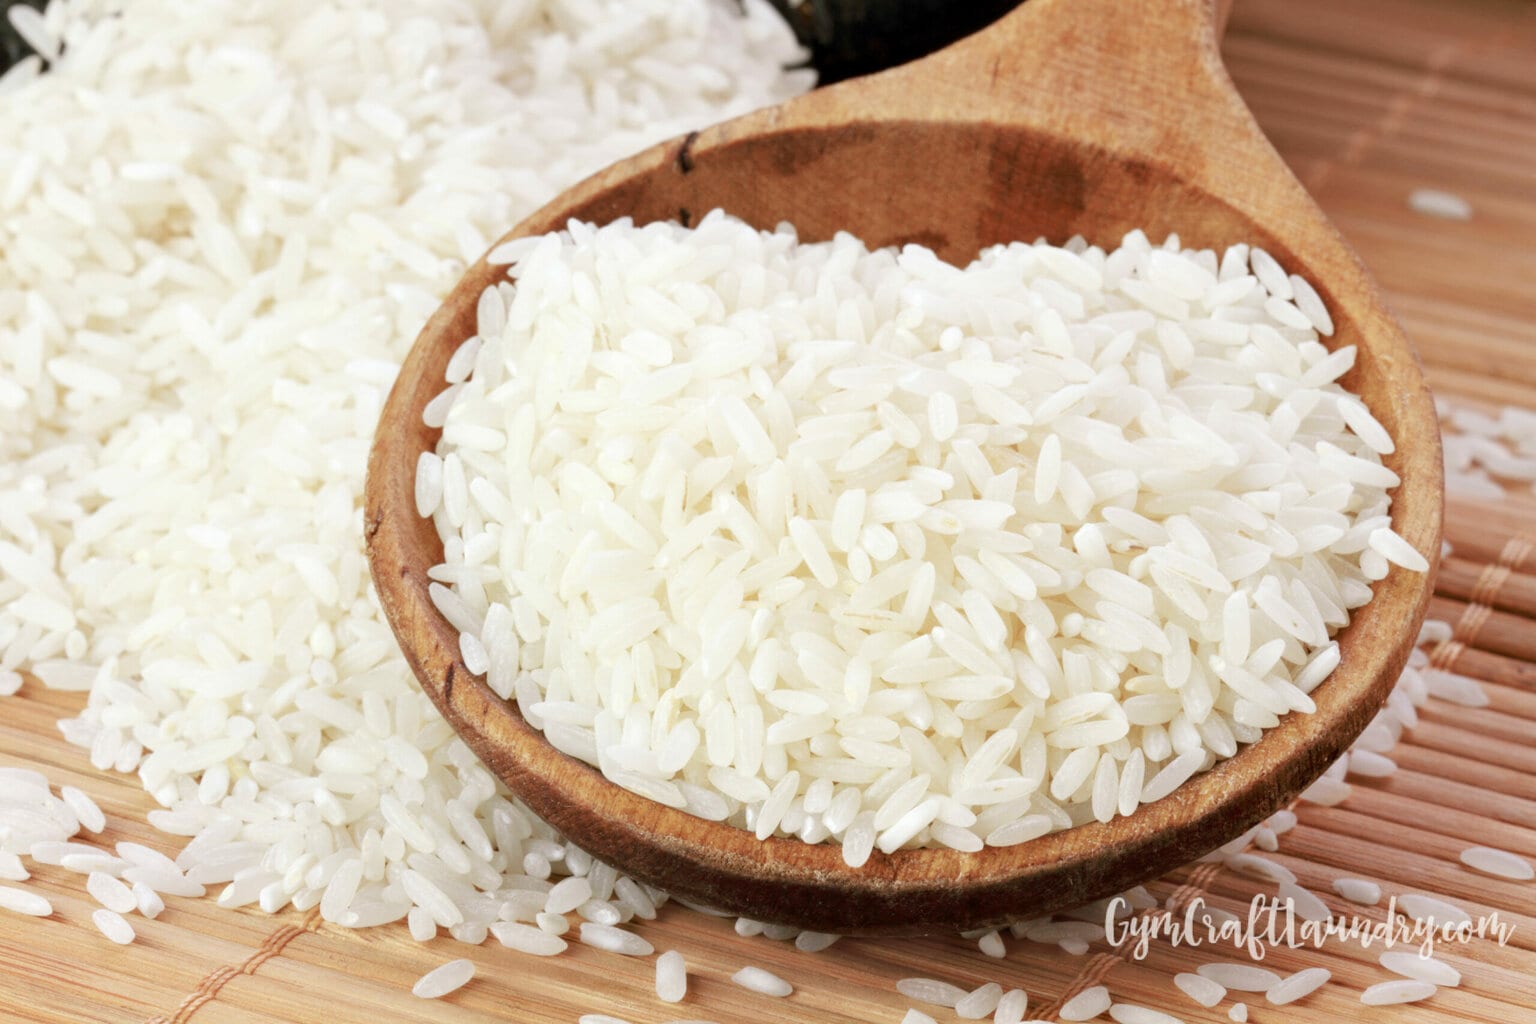 Wooden bowl with plain white rice